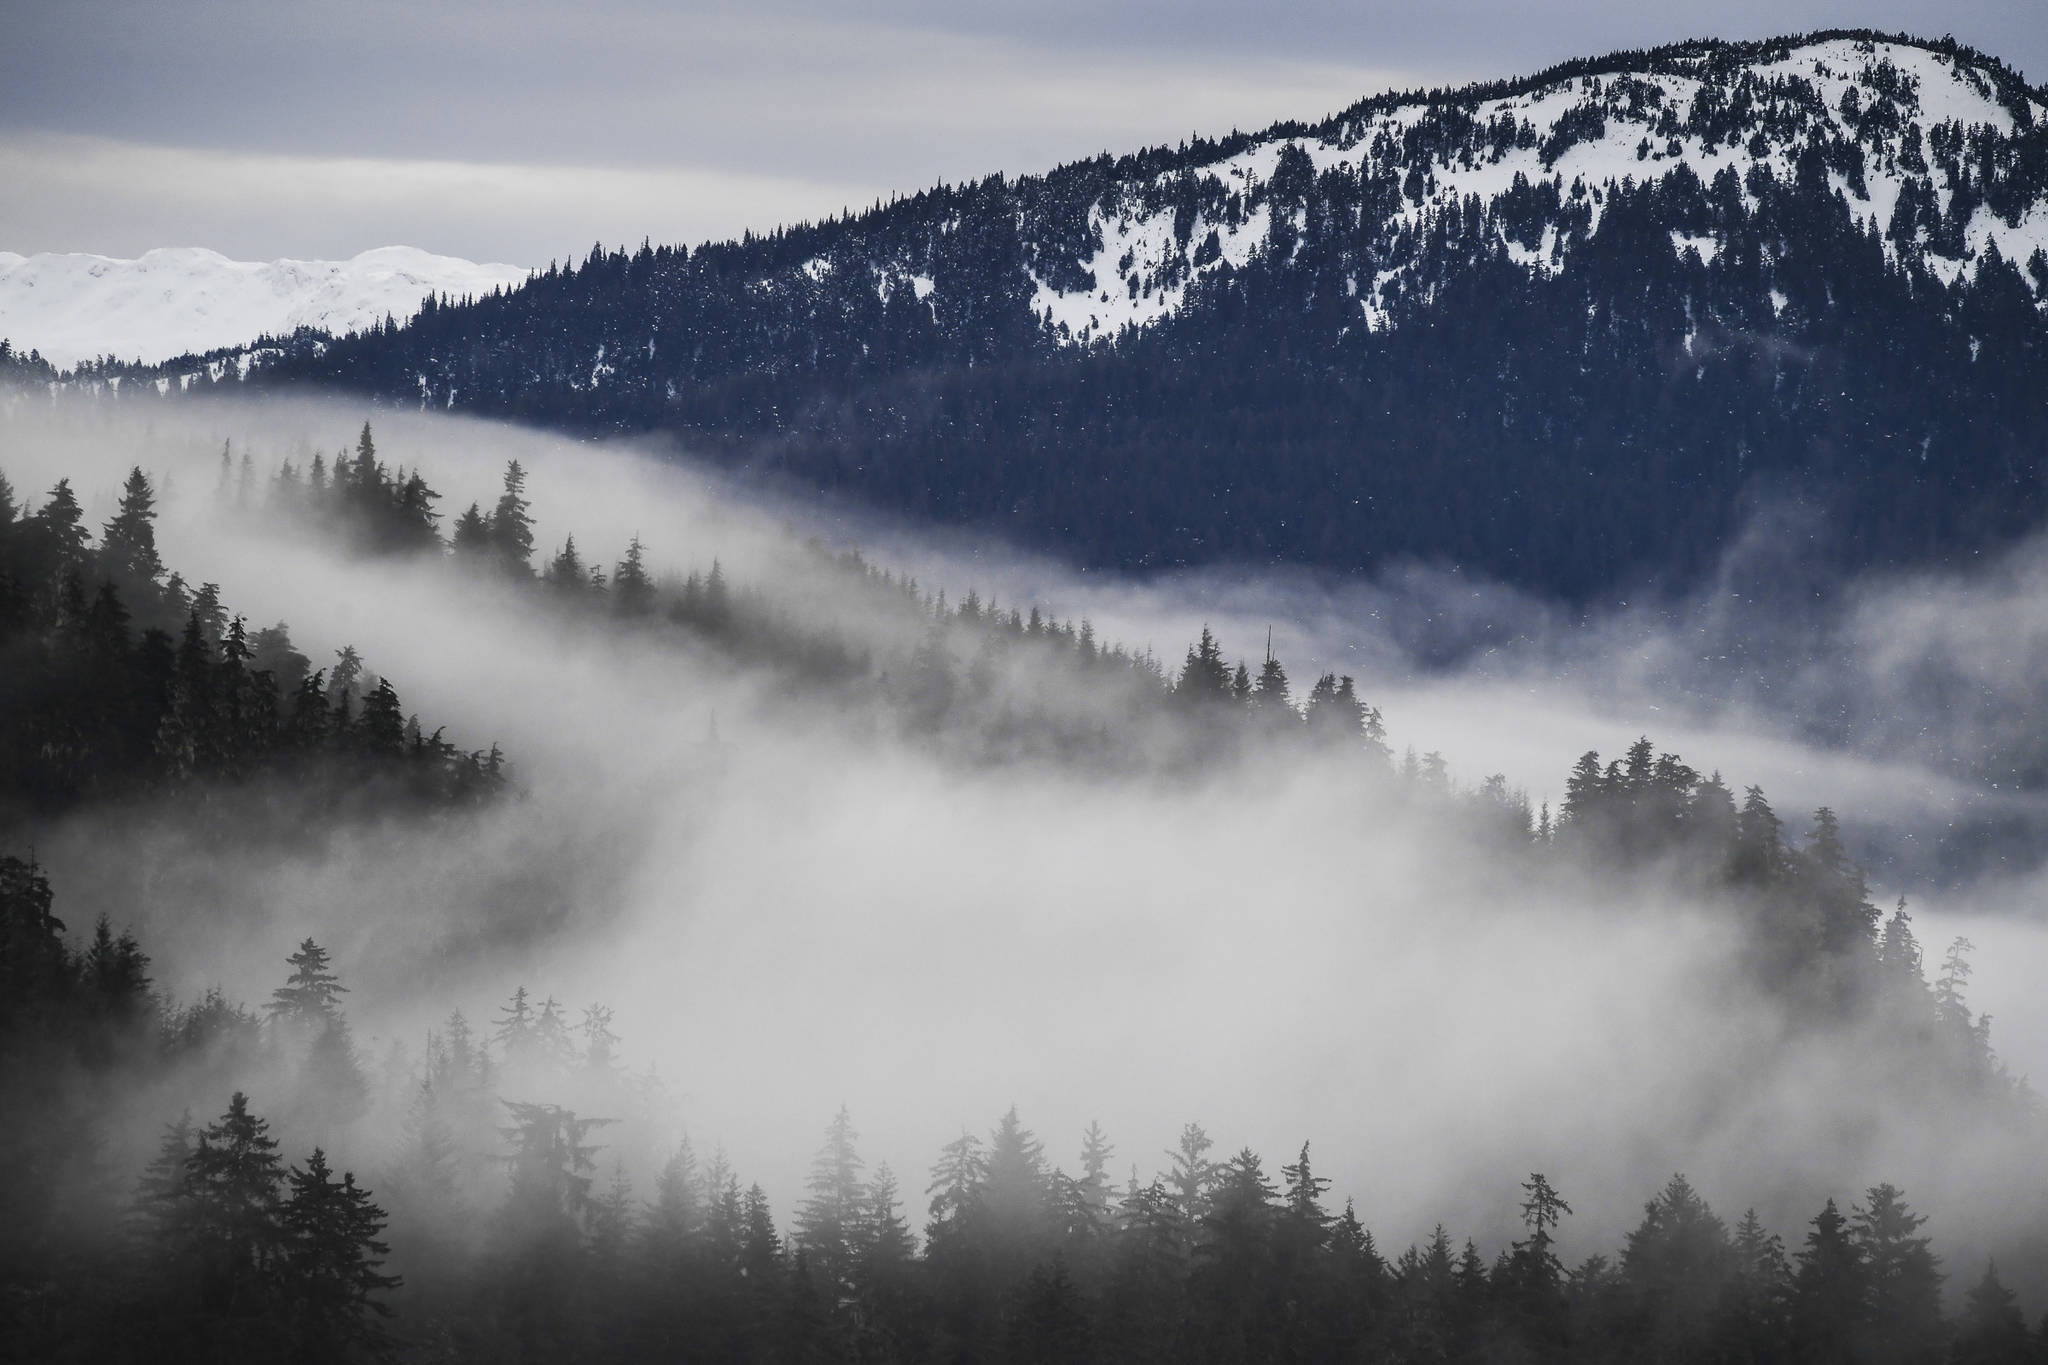 Fog drifts through the trees in the Tongass National Forest on Monday, Dec. 9, 2019. (Michael Penn | Juneau Empire)